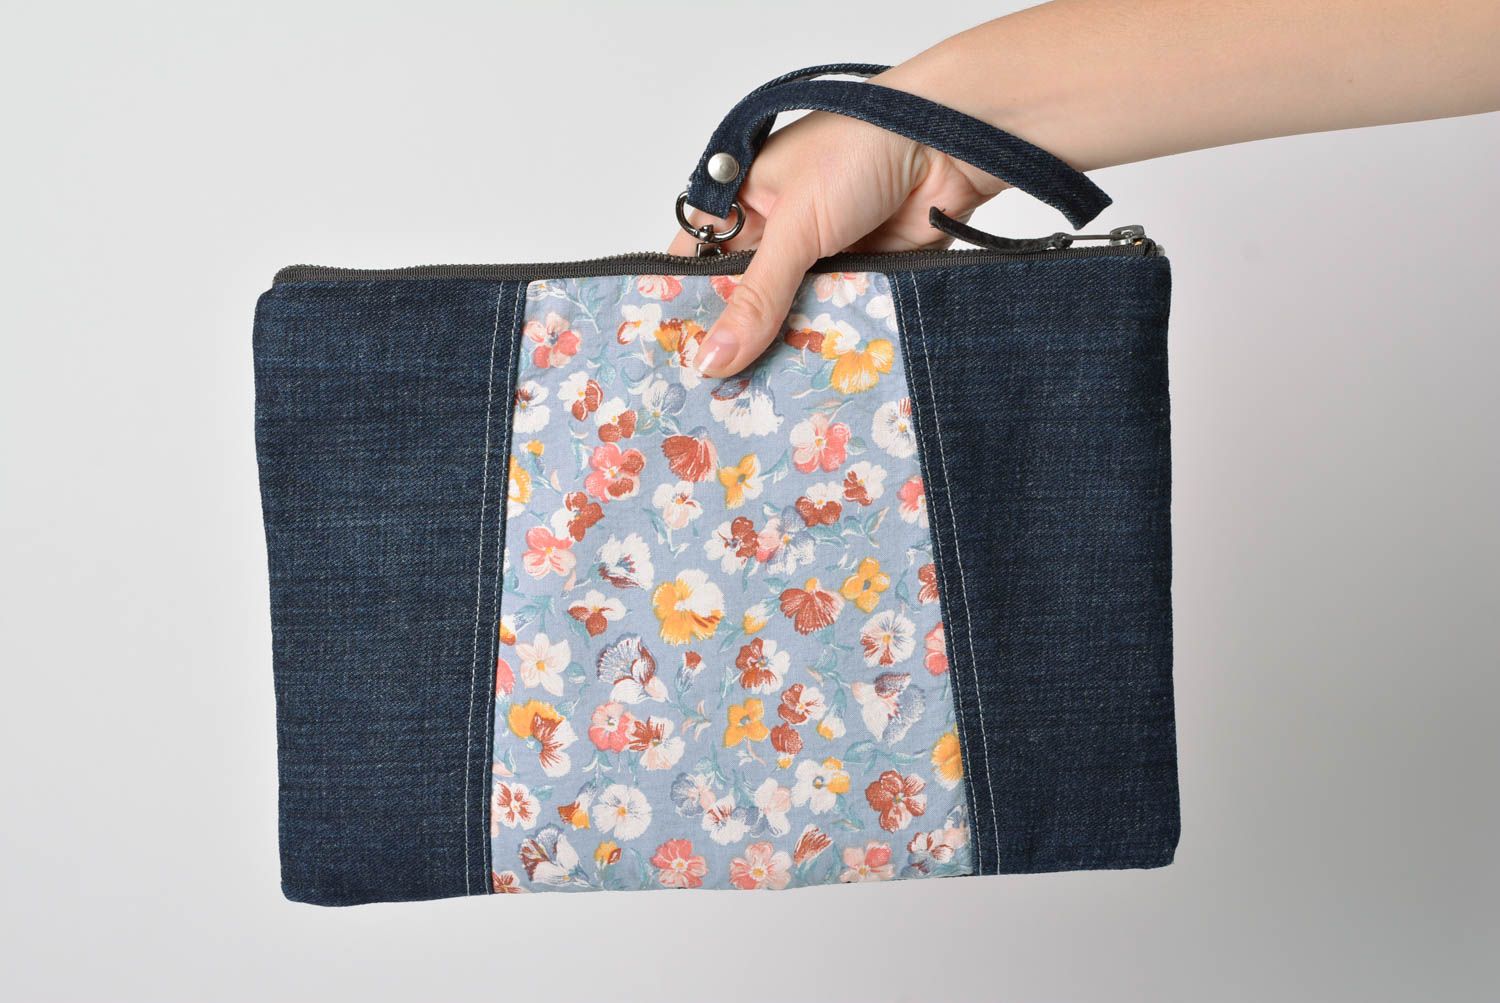 Small clutch bag made of denim with cotton insert and zipper ladies purse photo 5